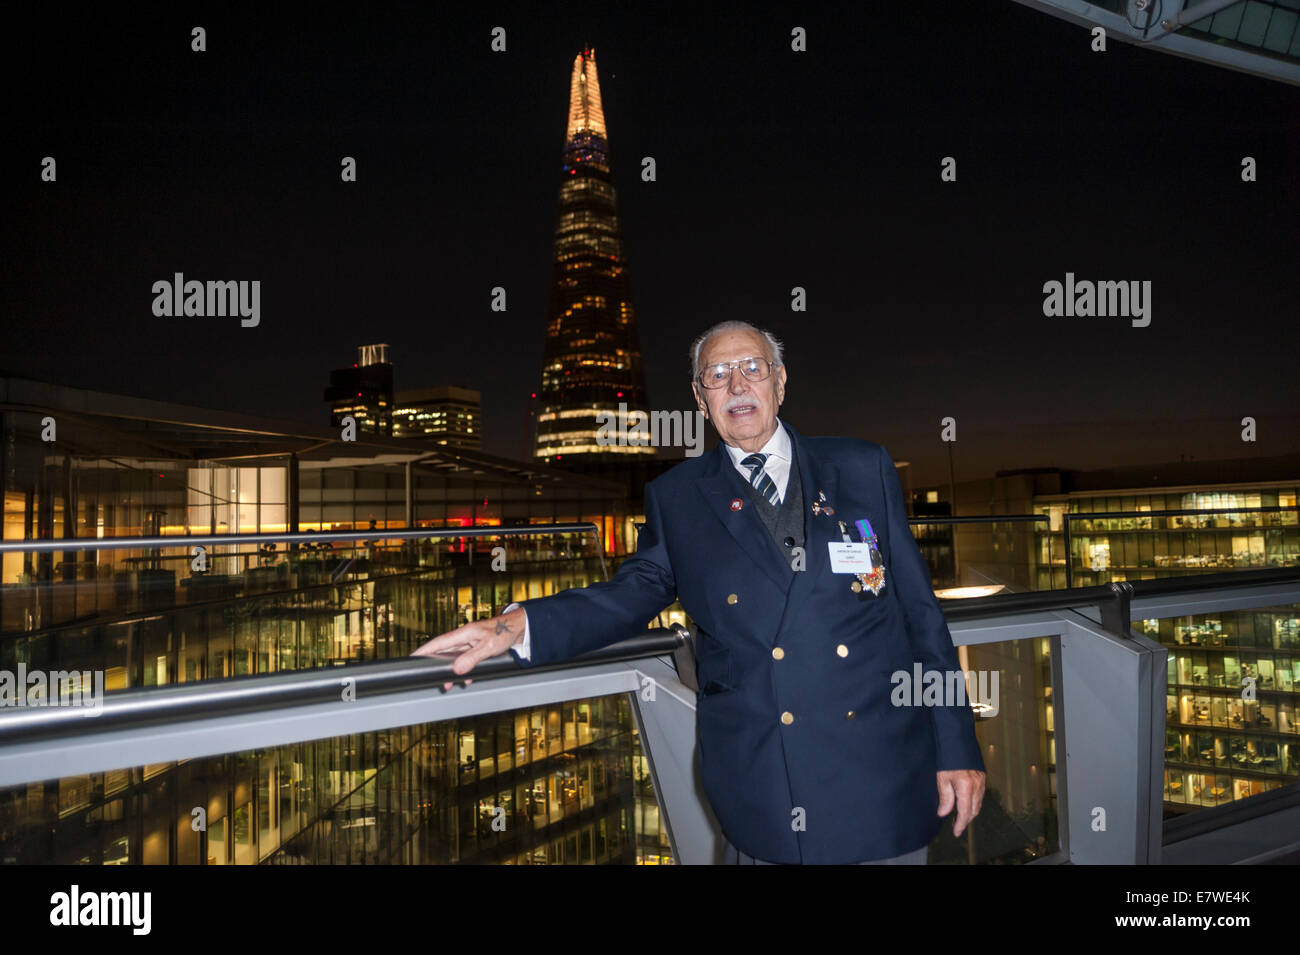 London, UK, 24 September 2014.  To mark the First World War Centenary and 75th anniversary of the start of the Second World War, the Mayor of London, Boris Johnson, commemorates the contribution of London-based veterans and military charities at a special community reception at City Hall.  Pictured: a veteran of the Suez conflict with his medals poses with the Shard as a backdrop.  Credit:  Stephen Chung/Alamy Live News Stock Photo